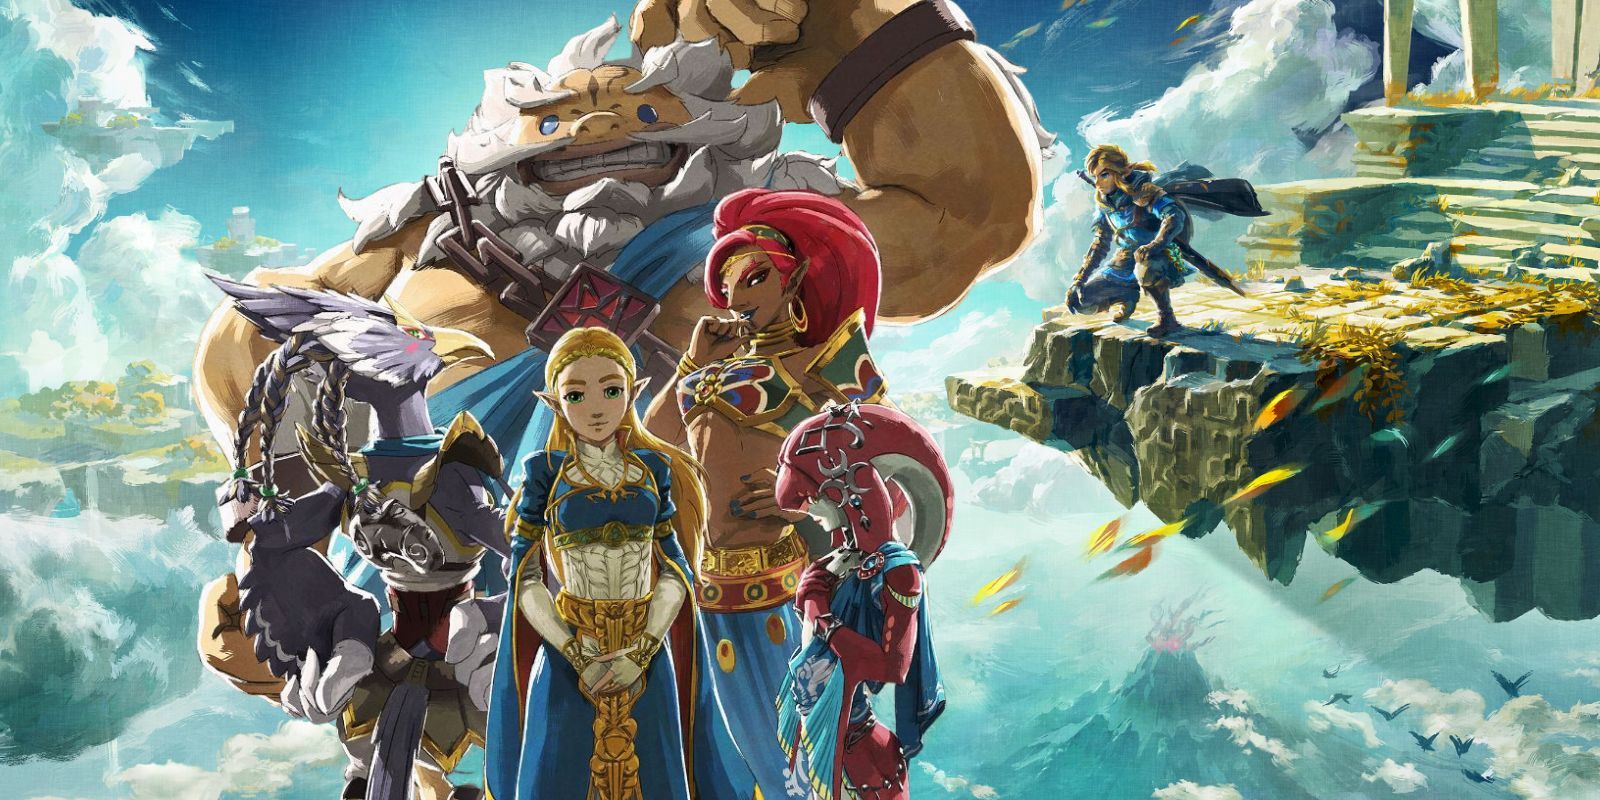 Set against a backdrop of Kingdom Tears promotional art, Breath of the Wild's four heroes surround Zelda, as Link perches on the edge of a floating island.